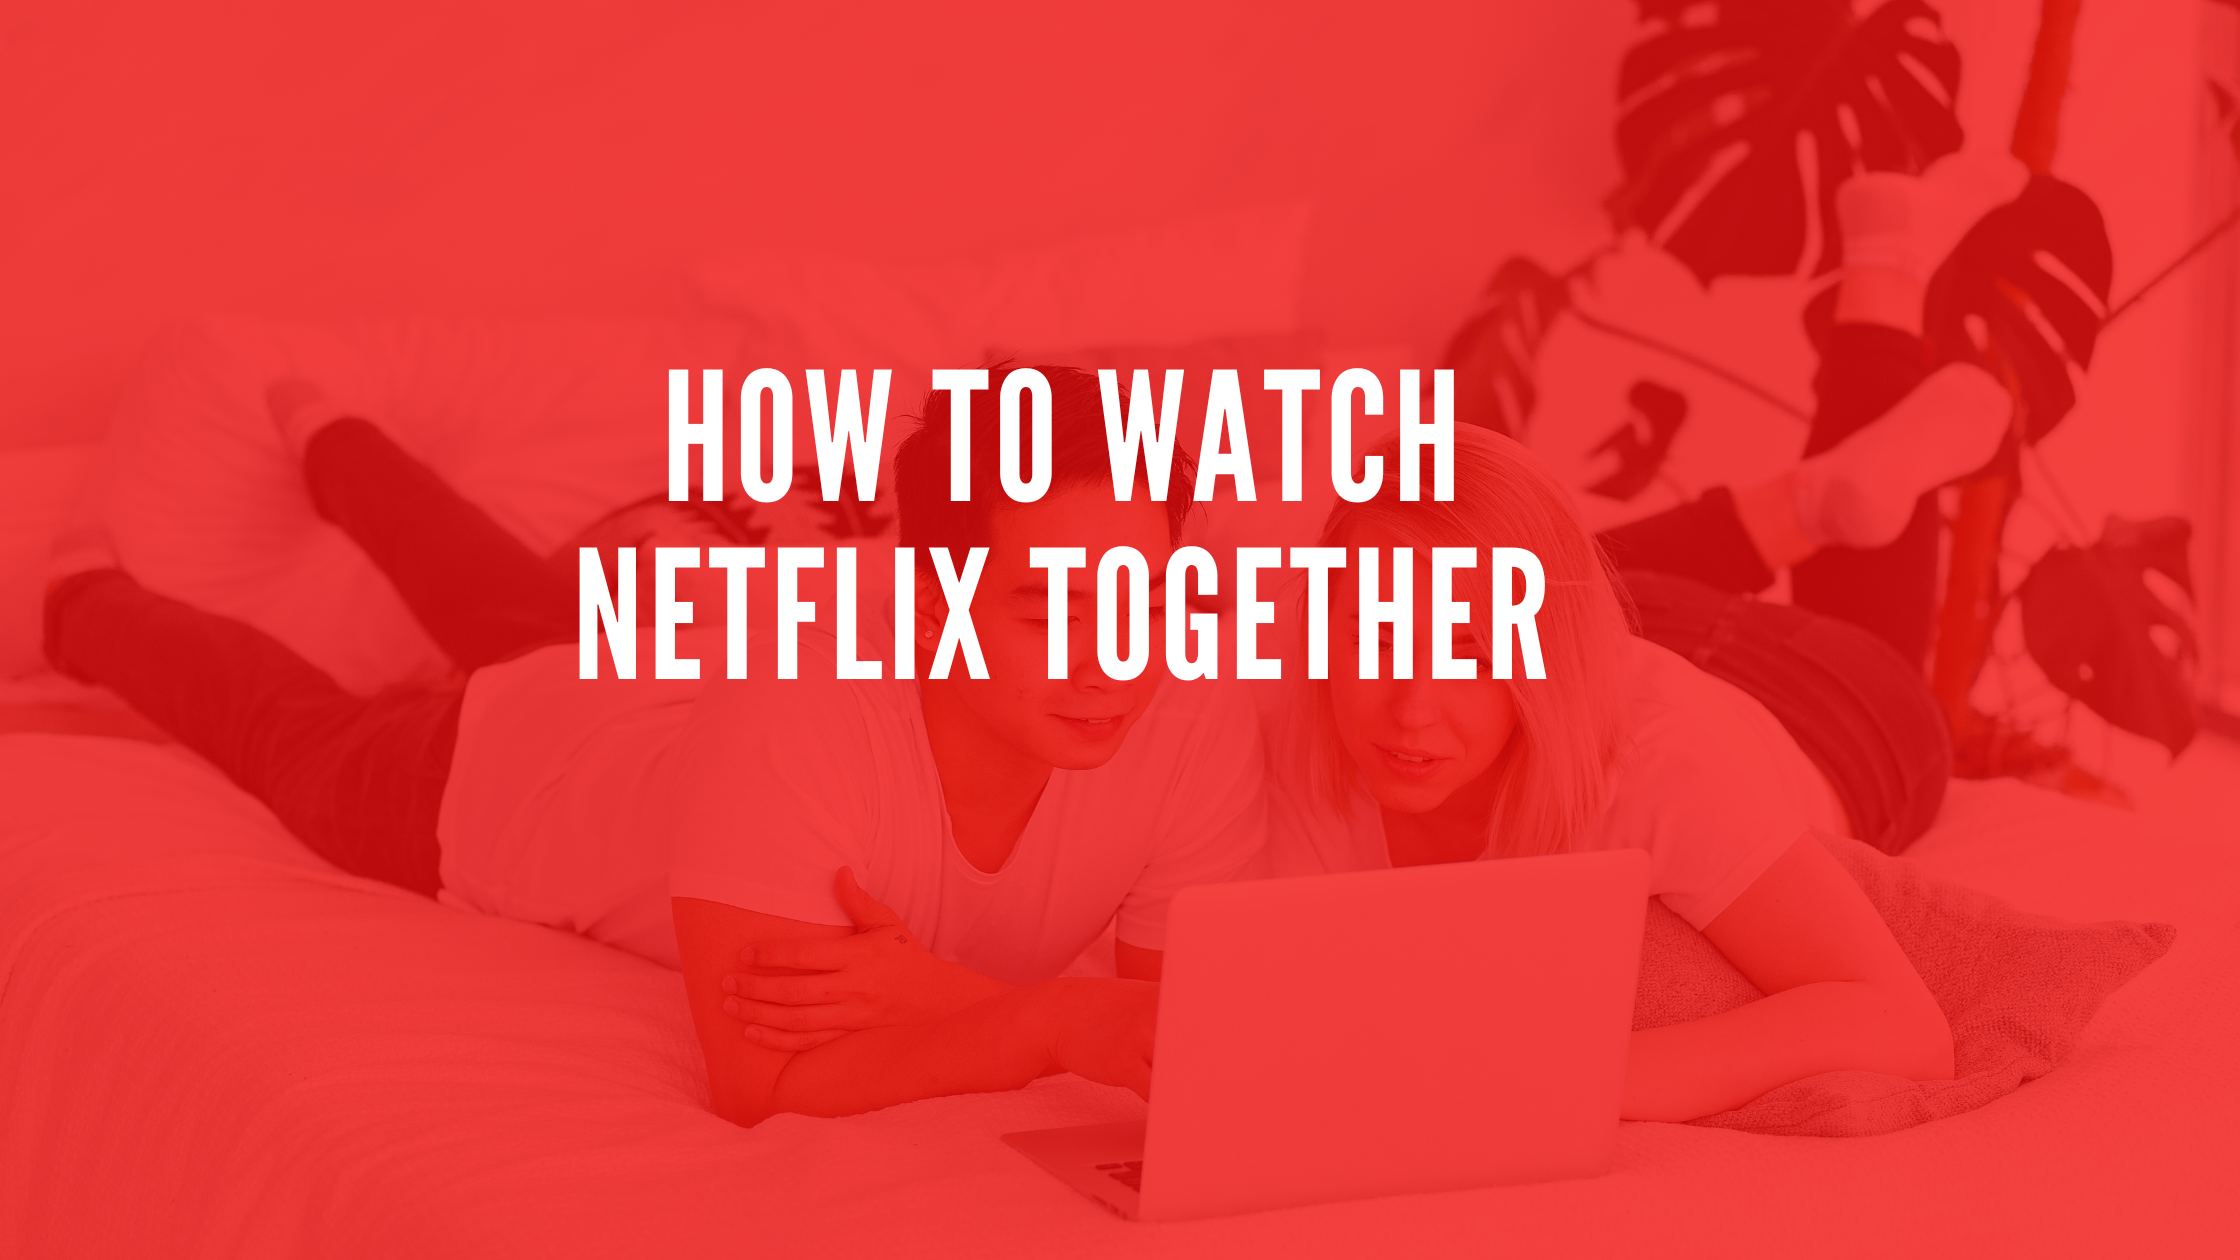 How To Watch Netflix Together